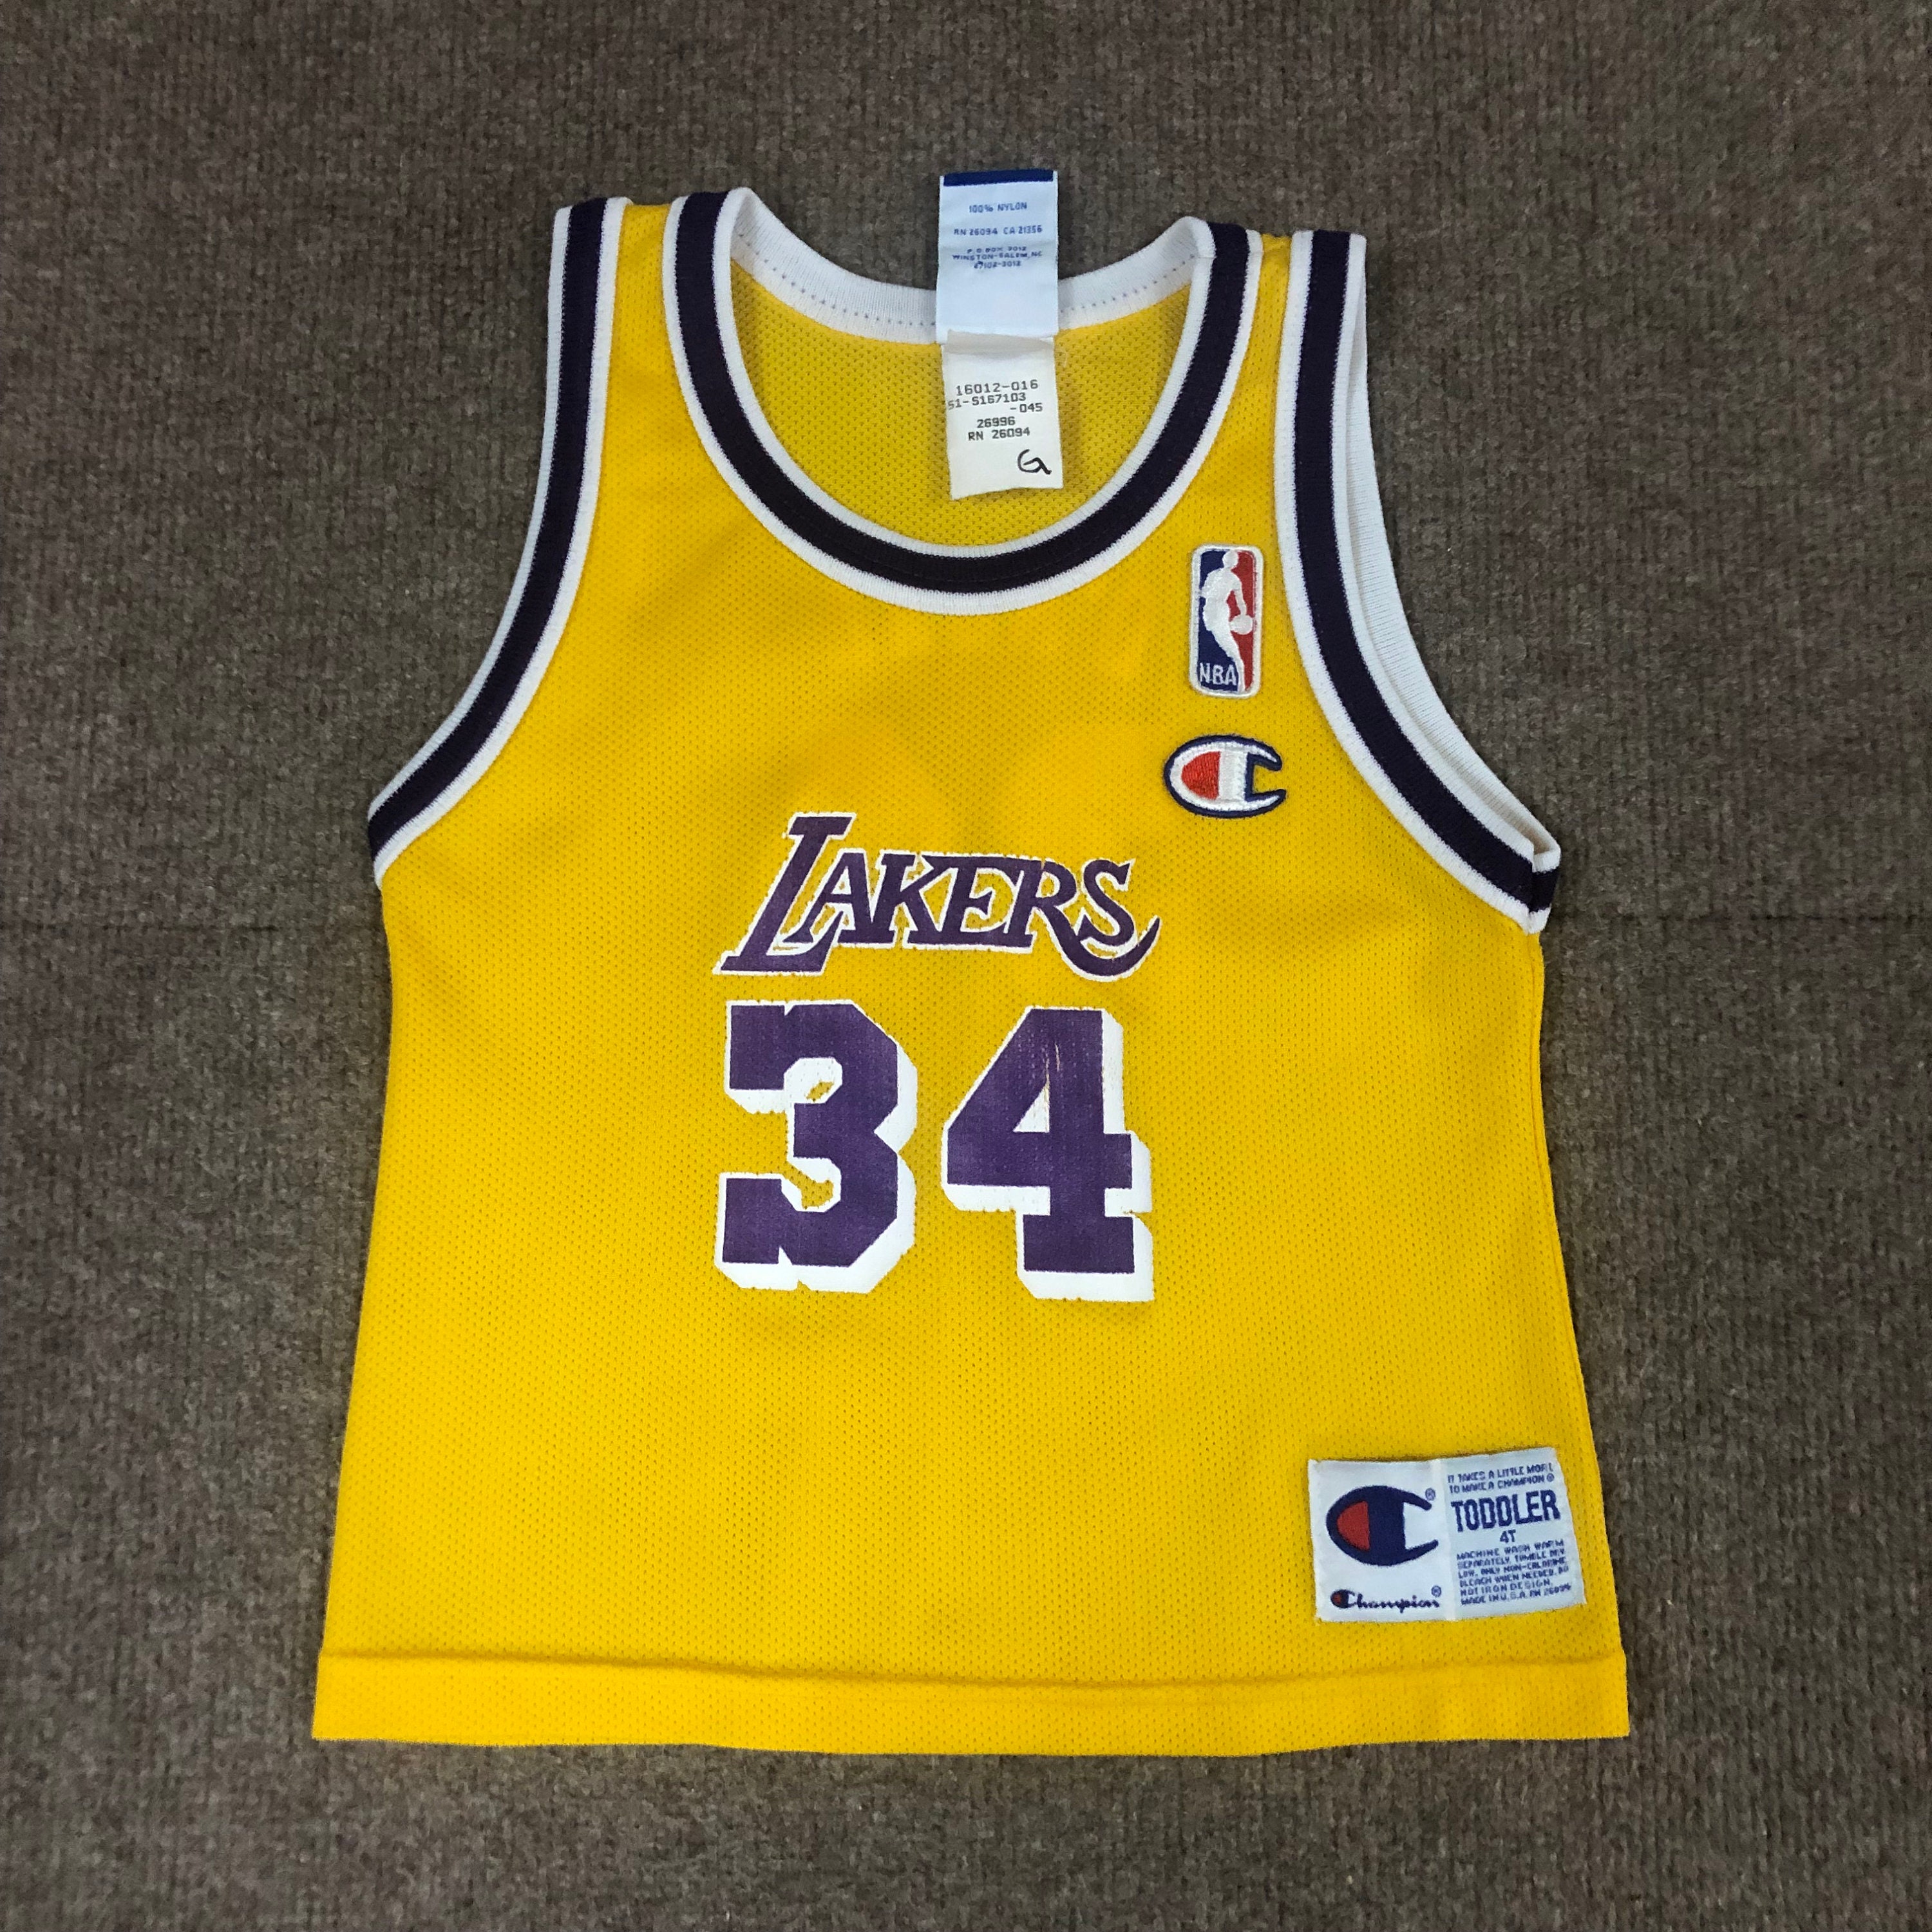 Shaquille Oneal #34 Lakers Jersey Black Champion size 44 Vintage 🔥🔥